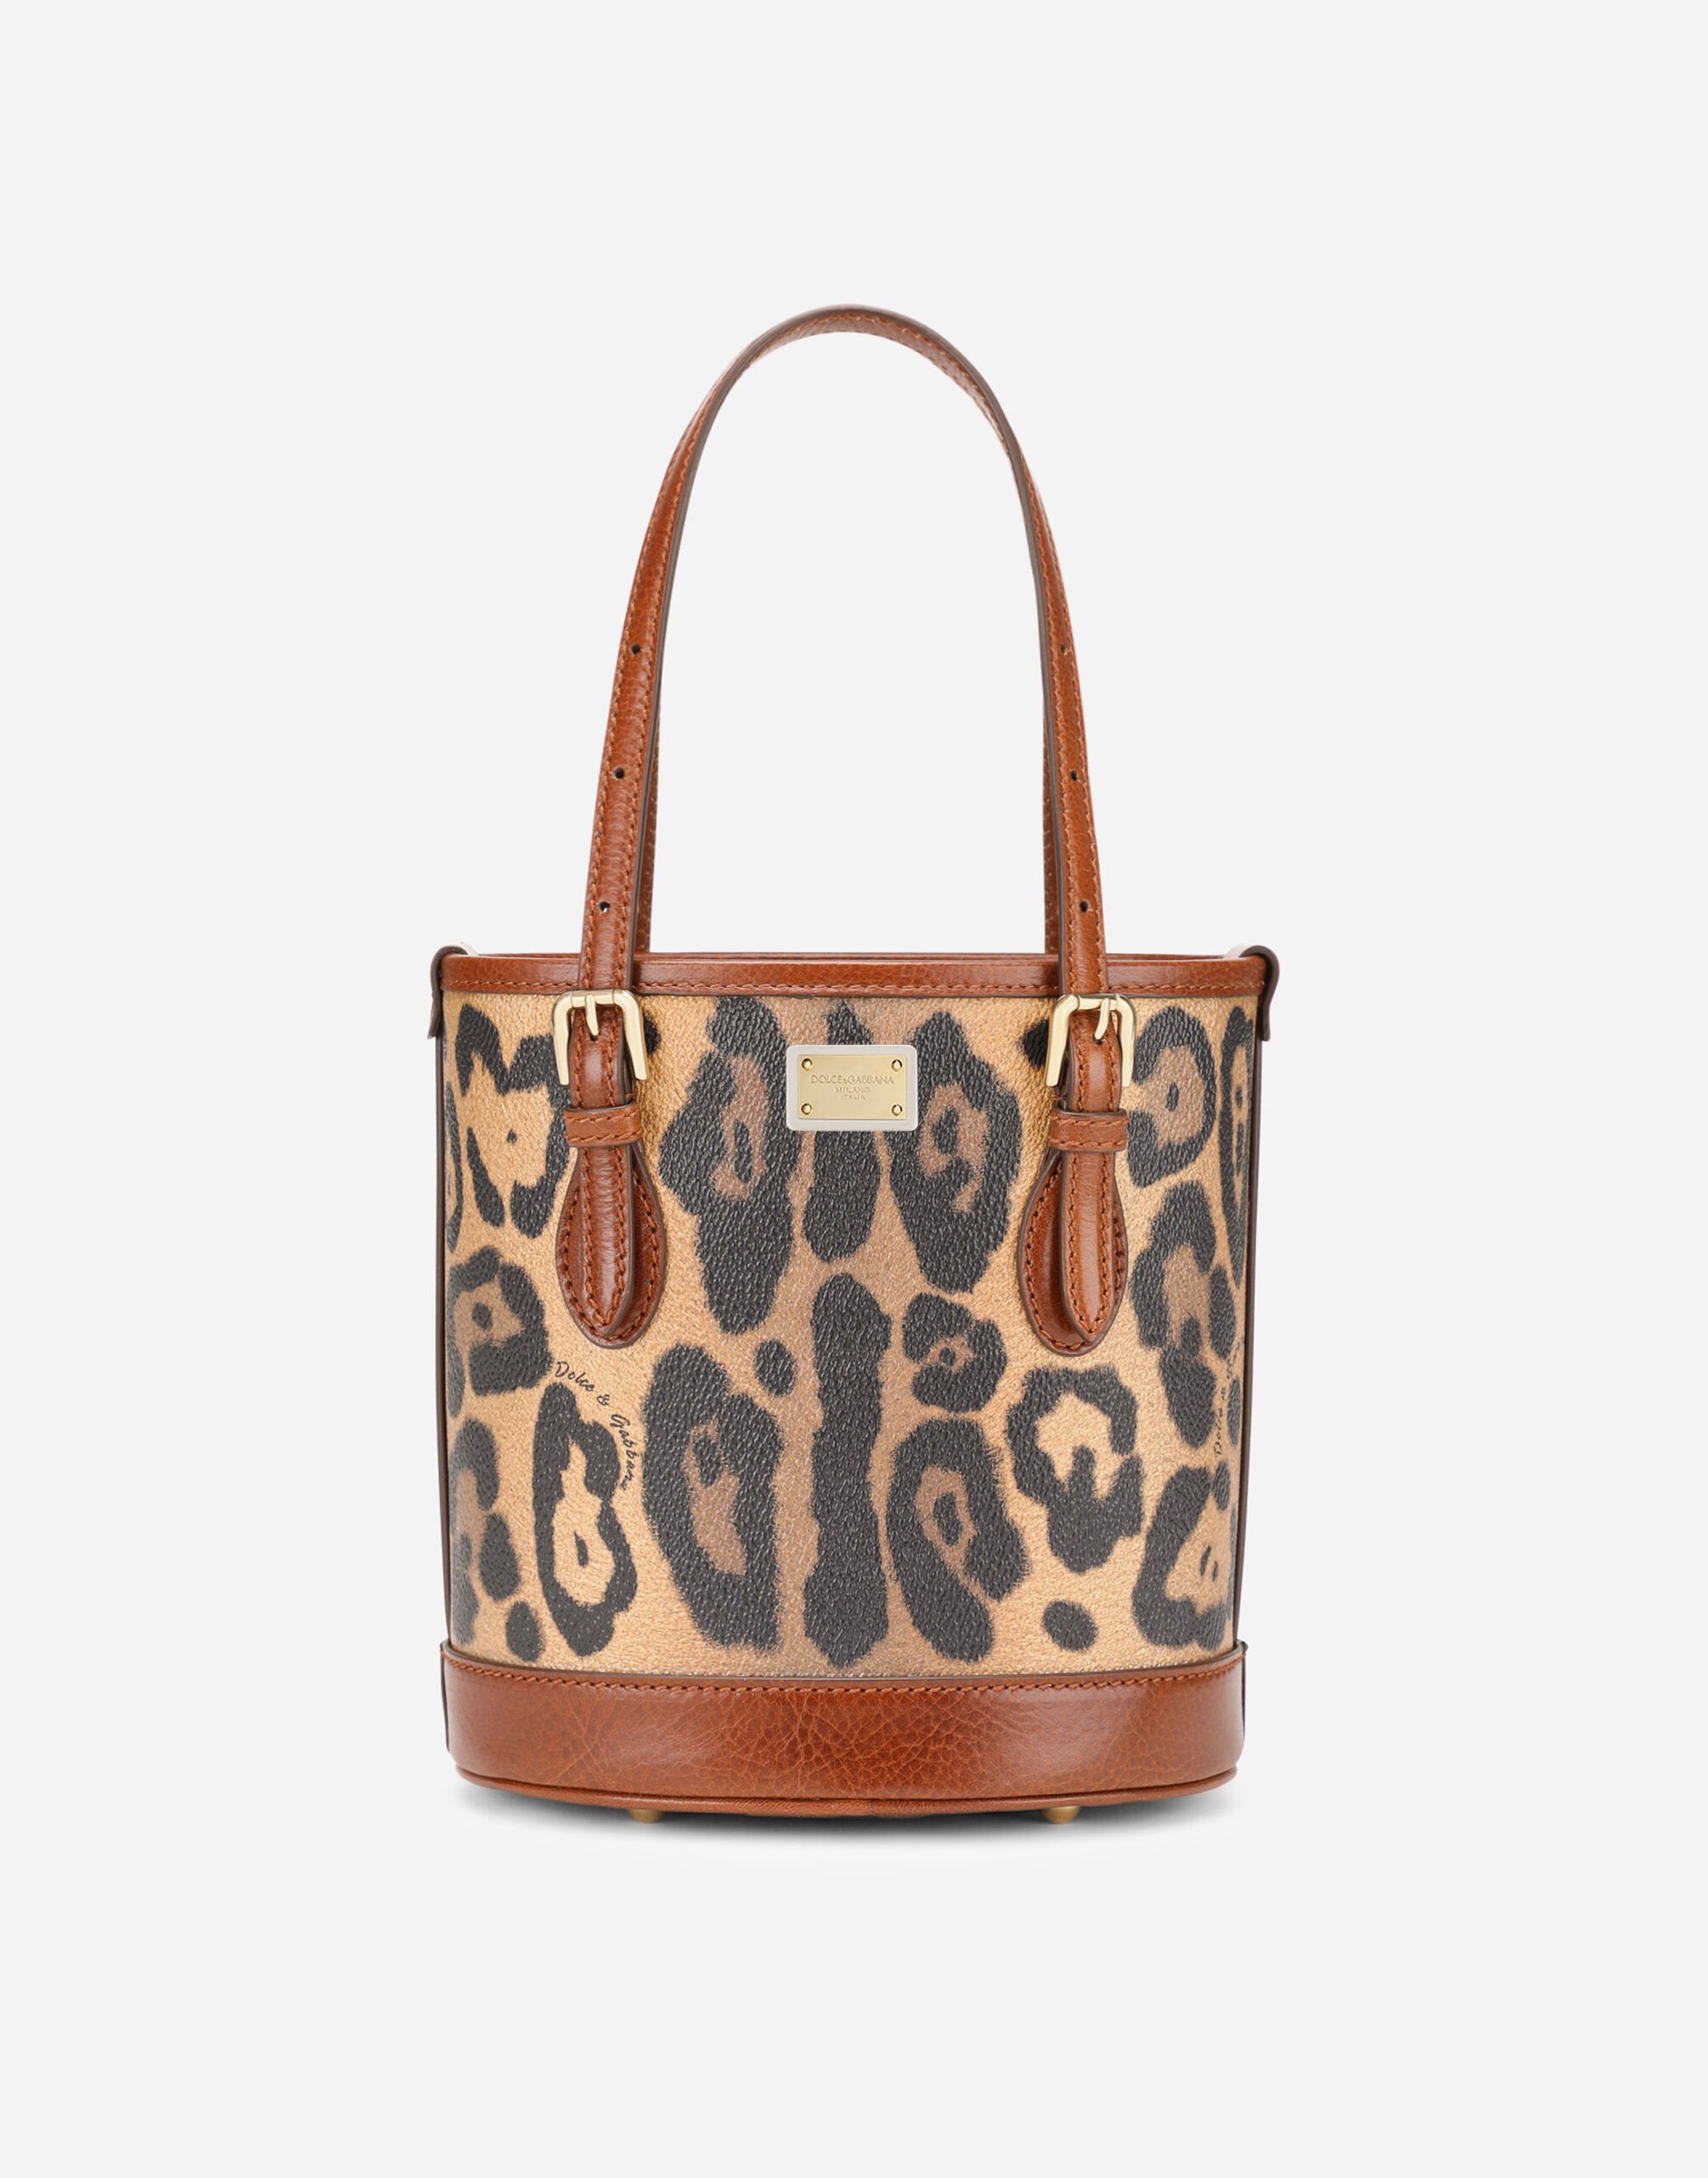 Dolce & Gabbana Small bucket bag in leopard-print Crespo with branded plate Multicolor BB7609AU648